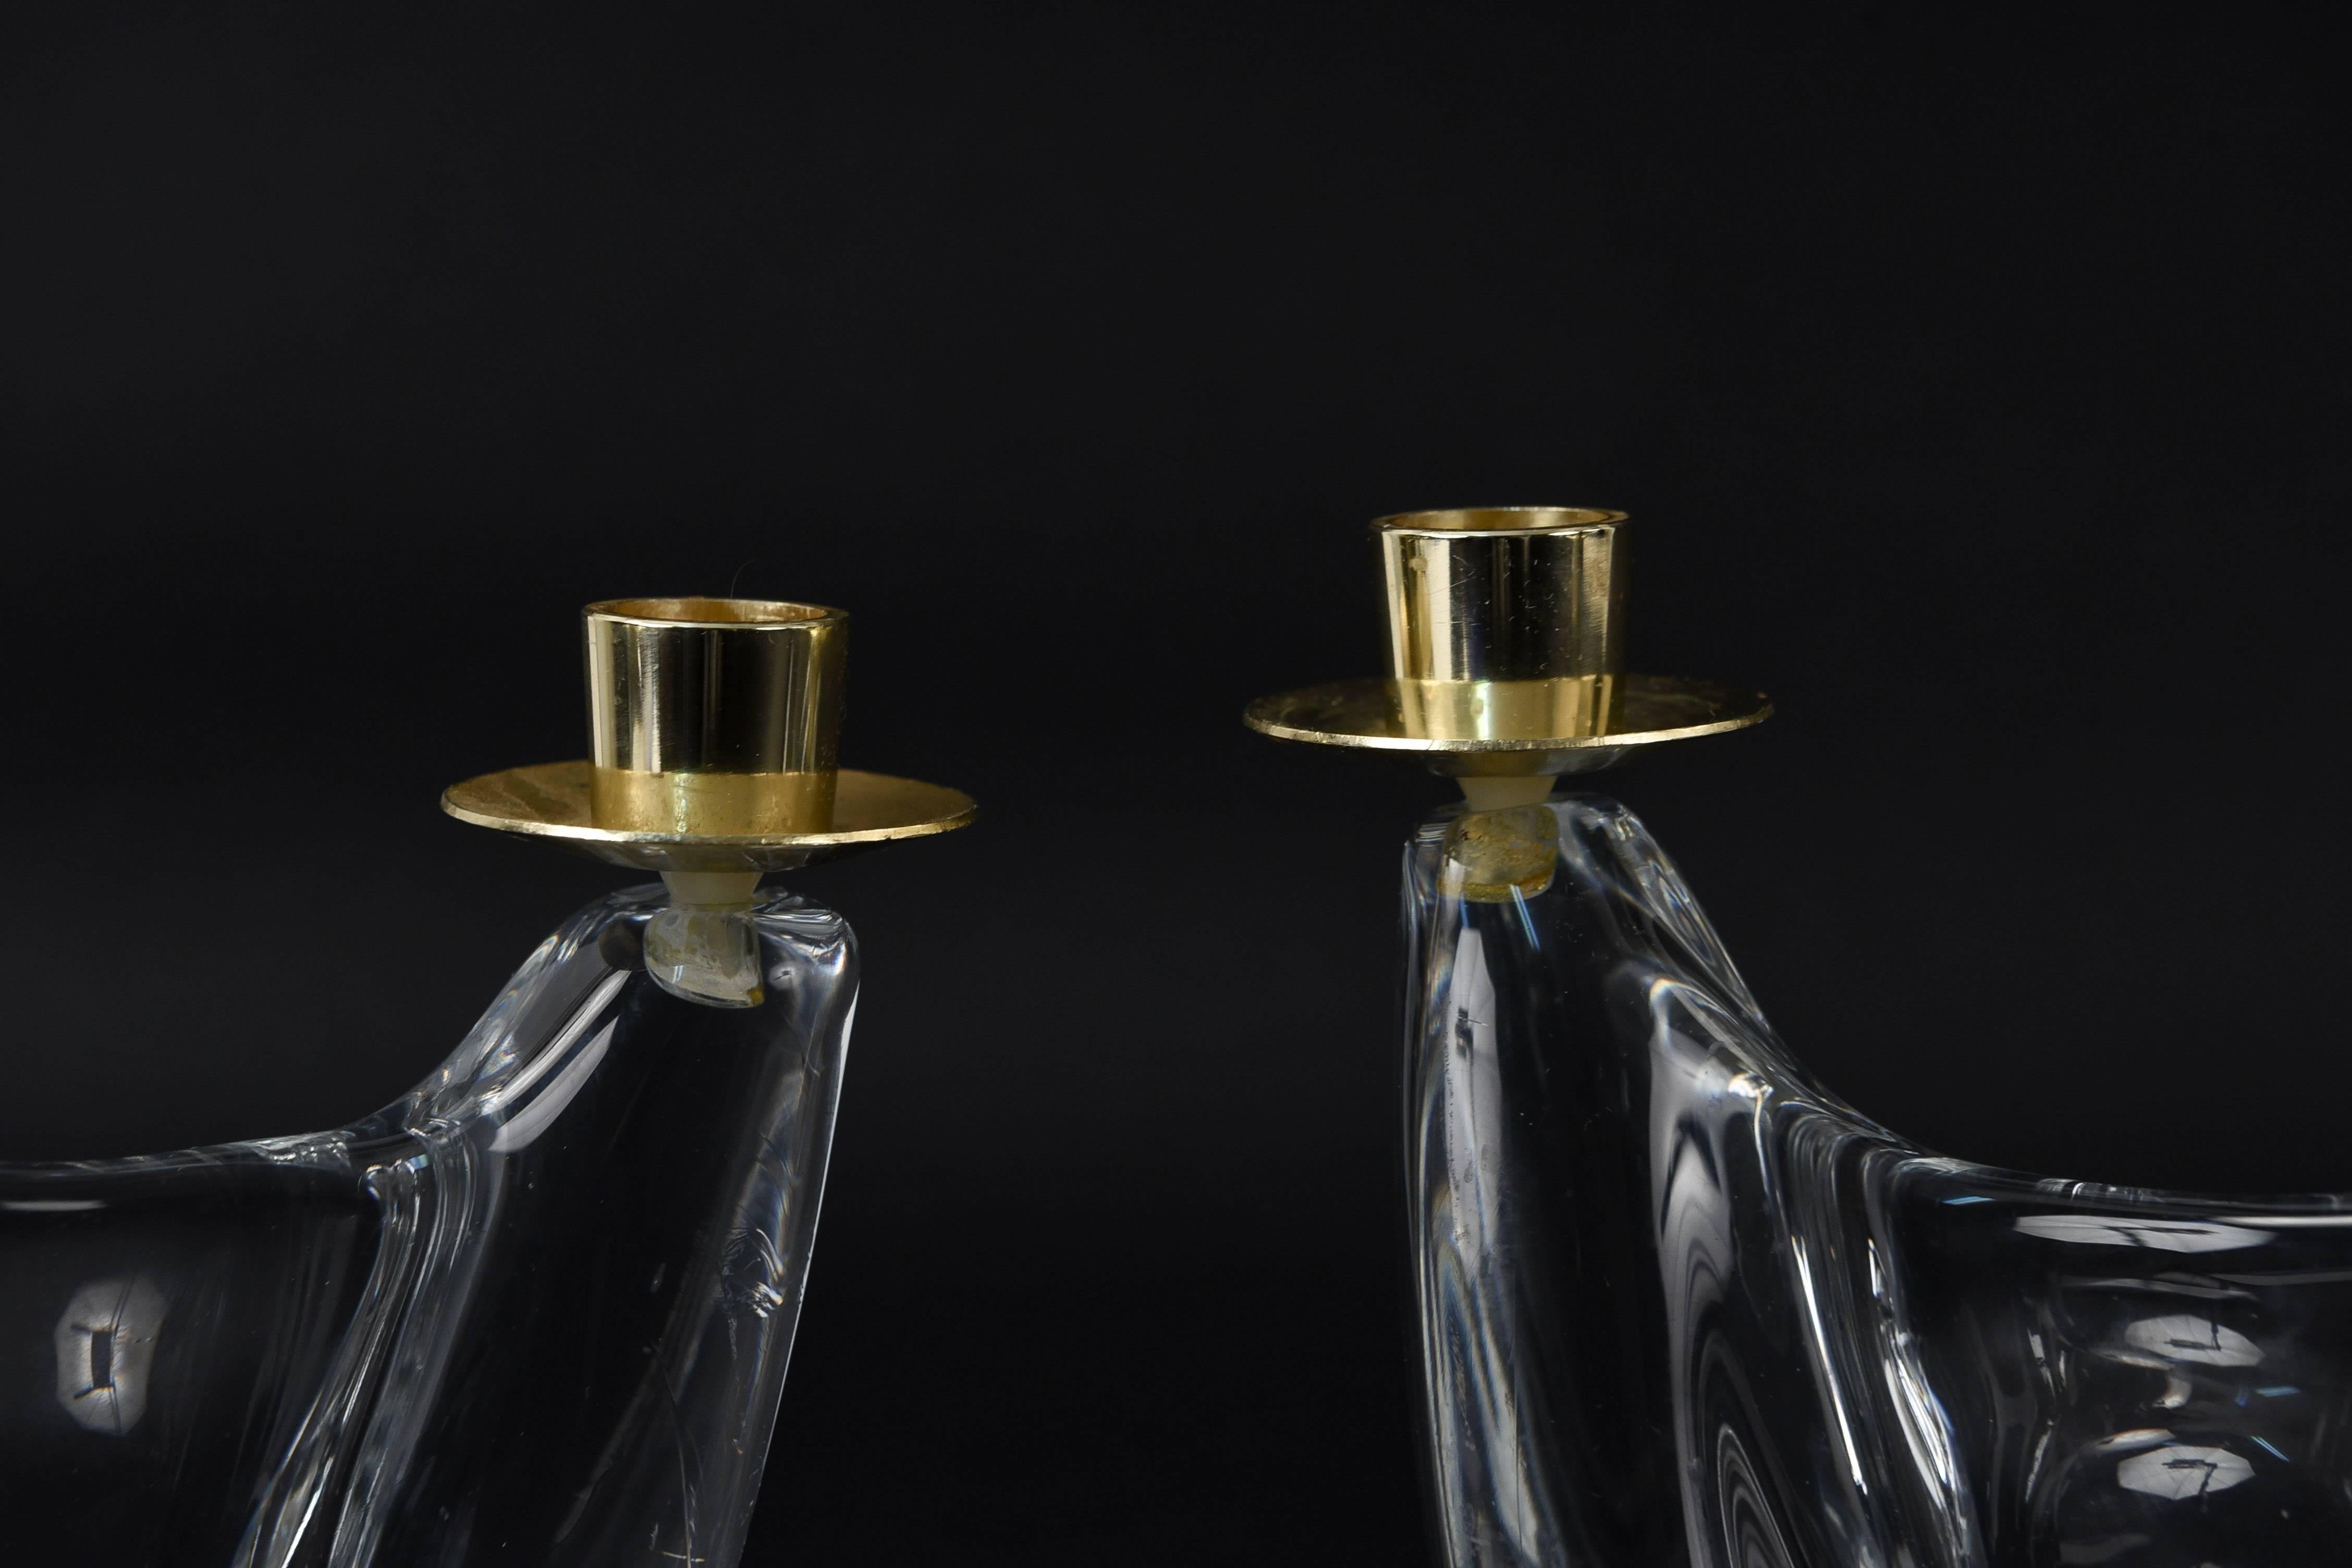 A really nice pair of abstract modern candlesticks, these timeless crystal works of art will be the delight of any table.